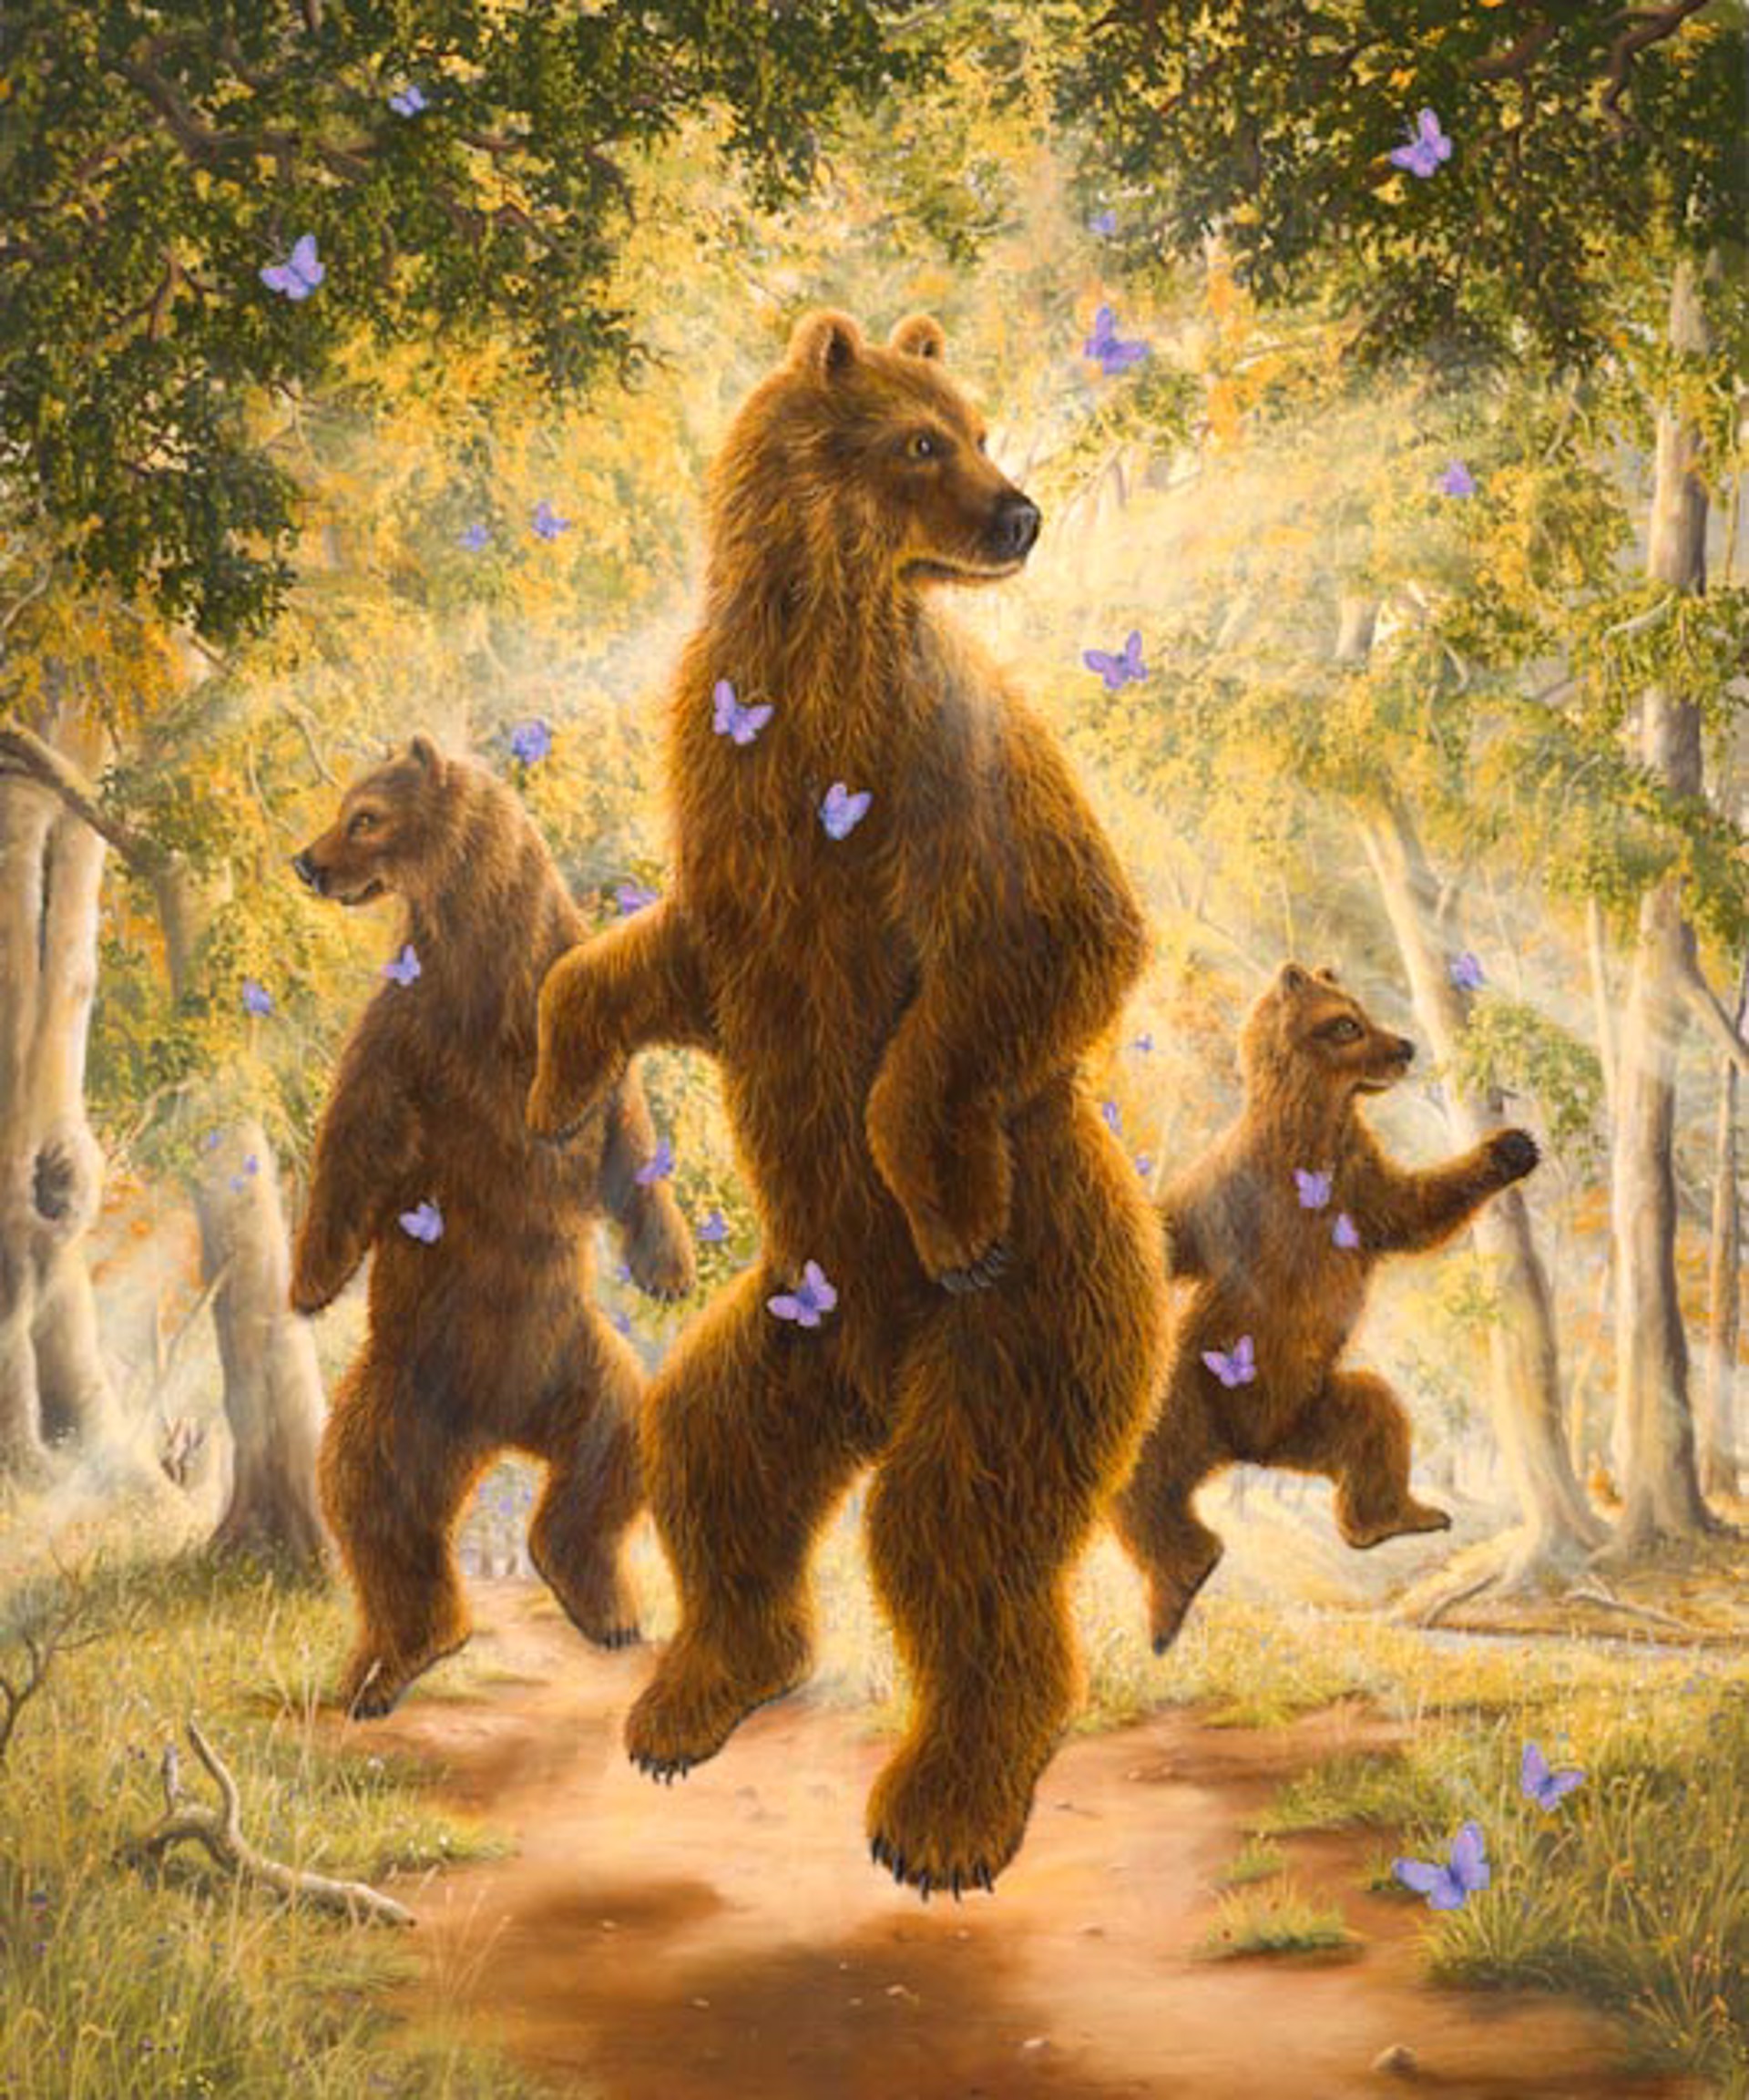 The Dancers by Robert Bissell